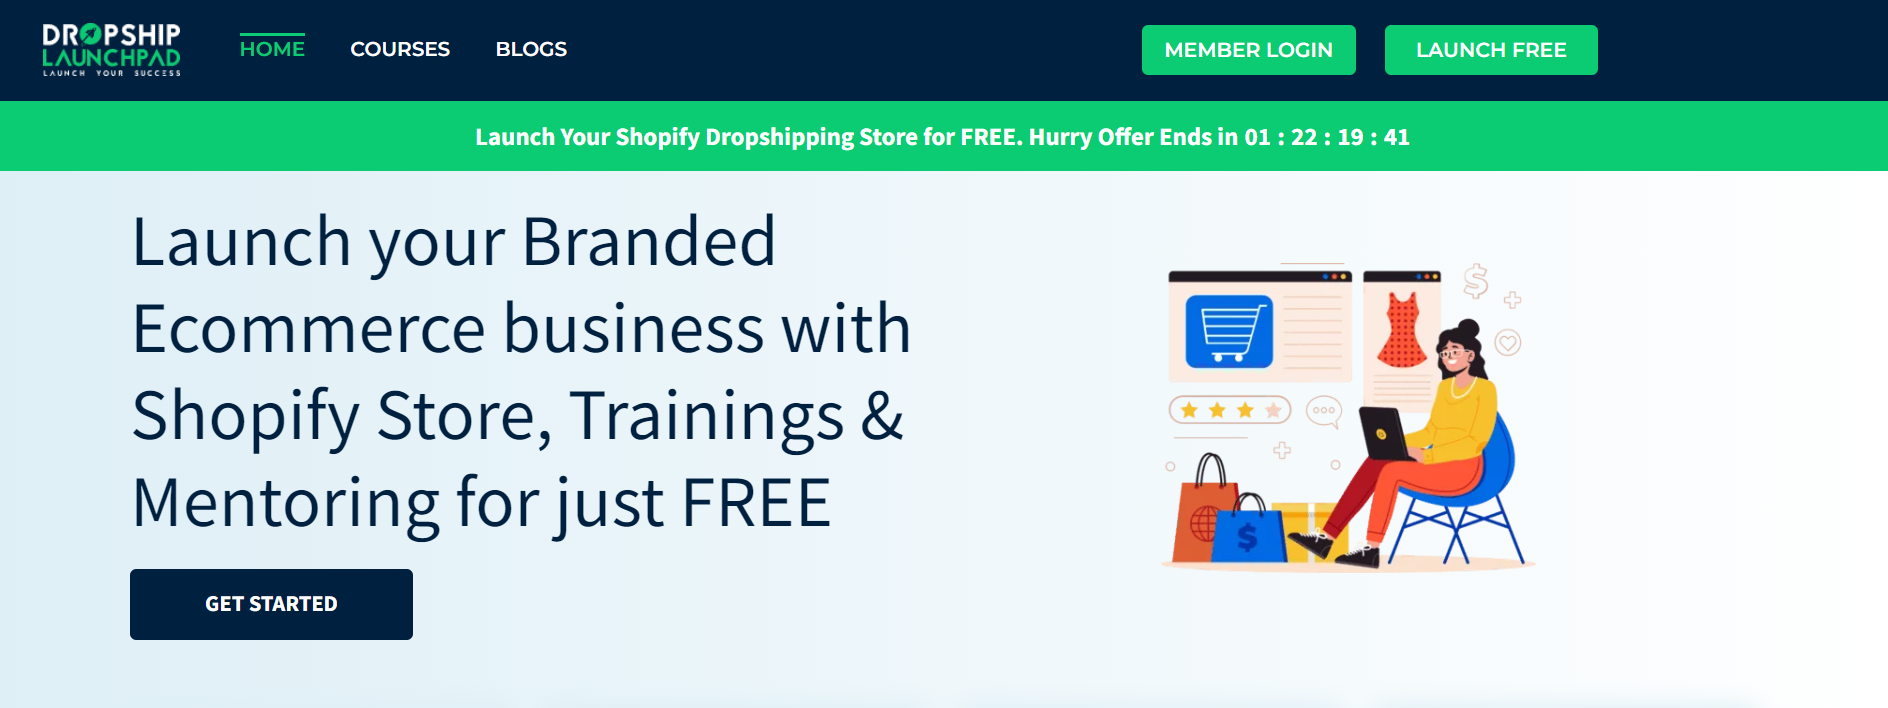 Can Dropship Launchpad find profitable dropshipping products to sell?